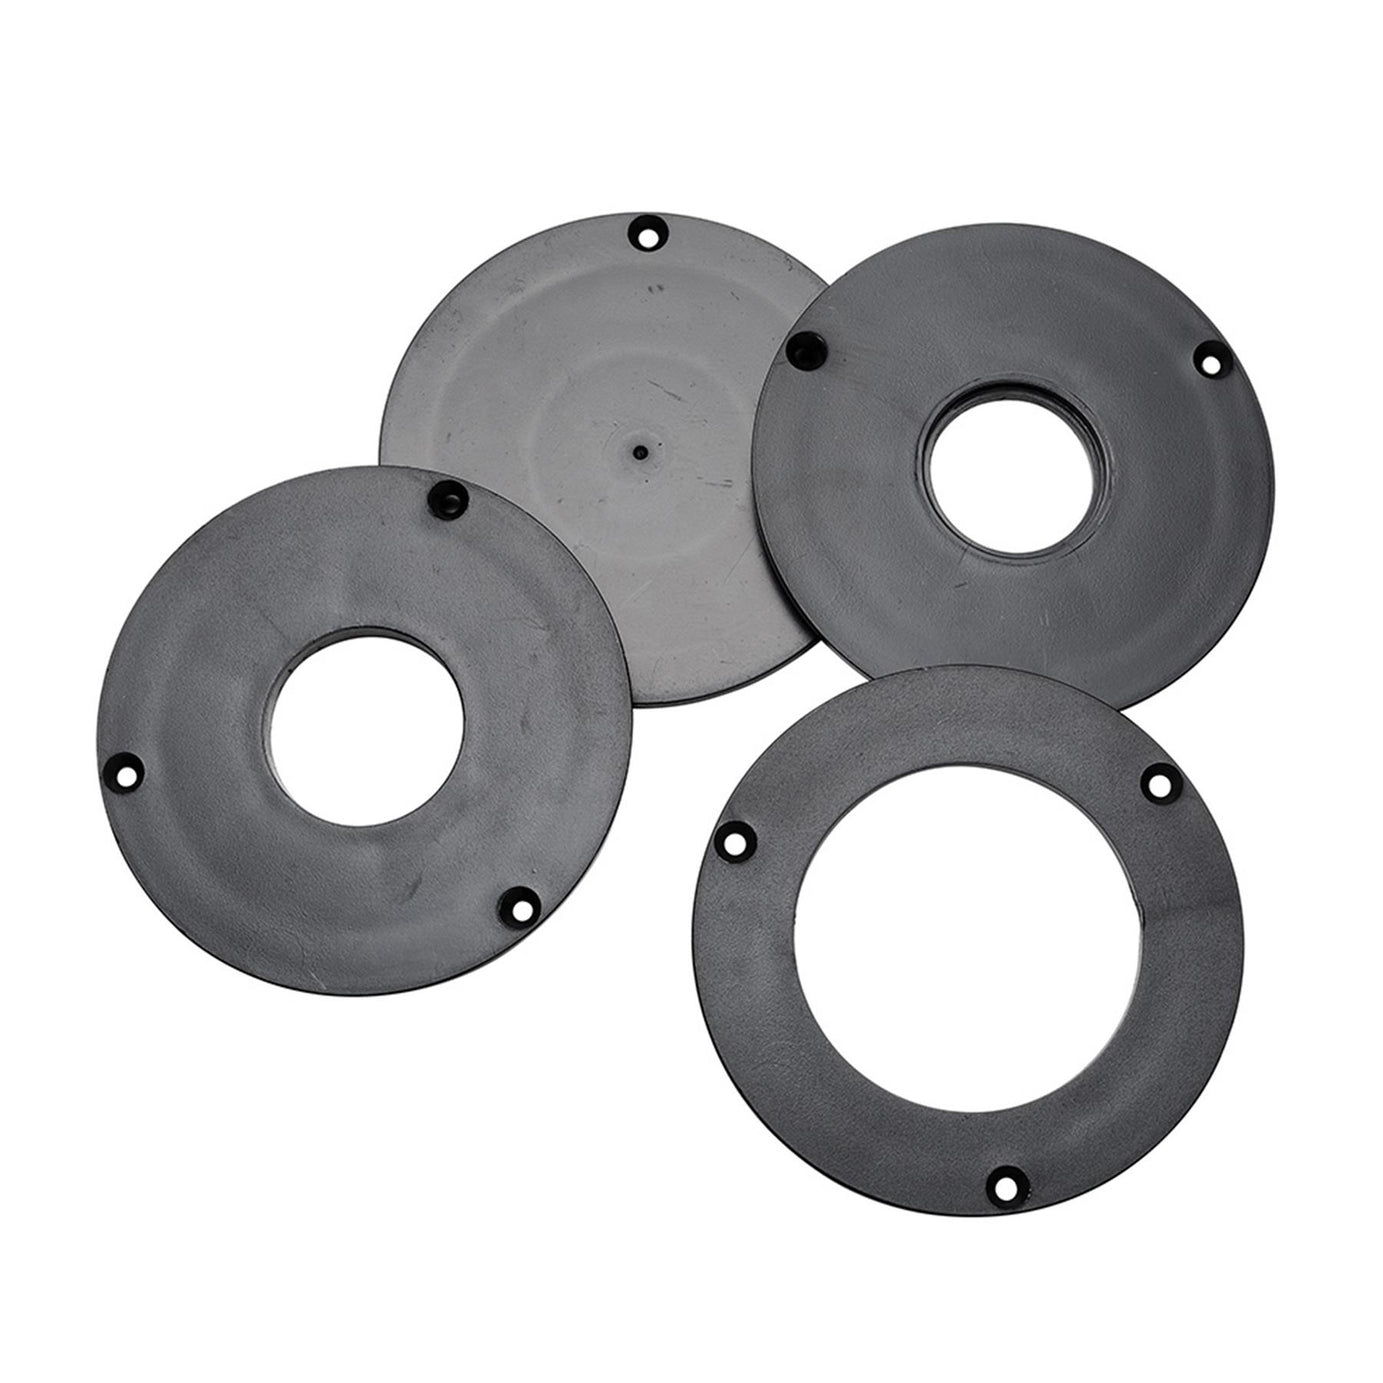 For Woodworking Aluminum Router Table Insert Plate With 4 Rings Sturdy Plastic